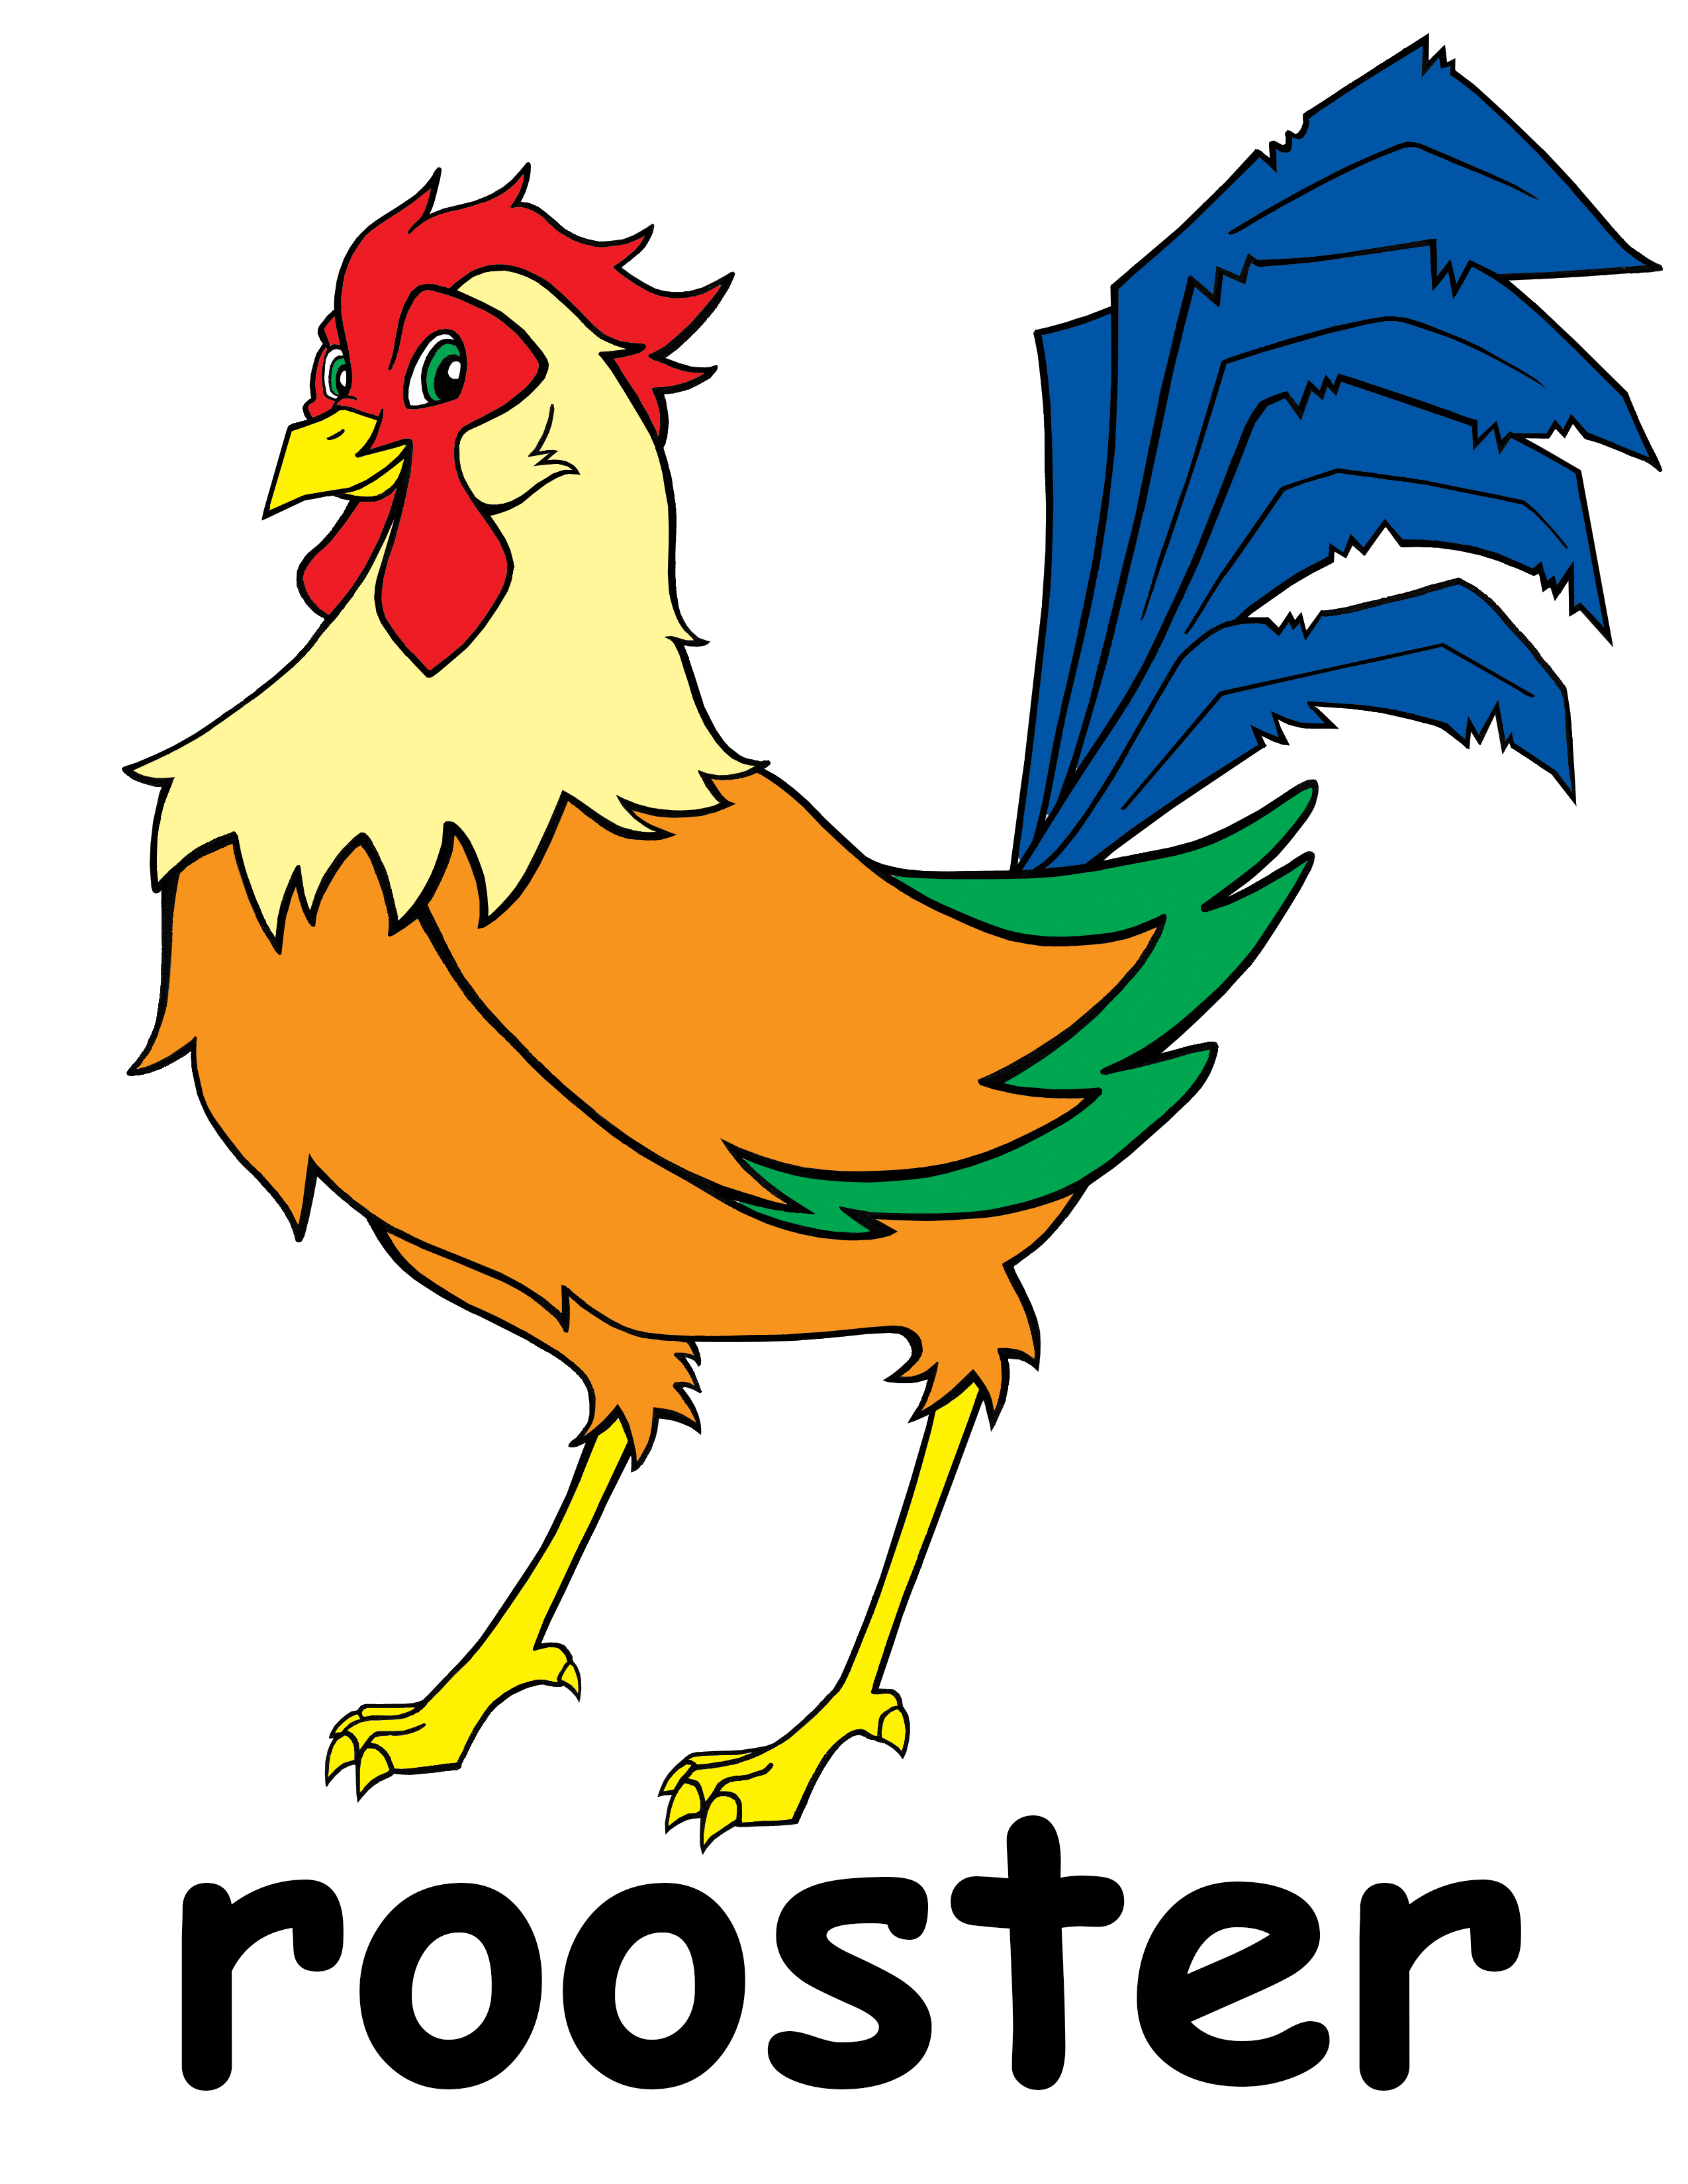 Rooster Cartoon Images Free Download Clipart